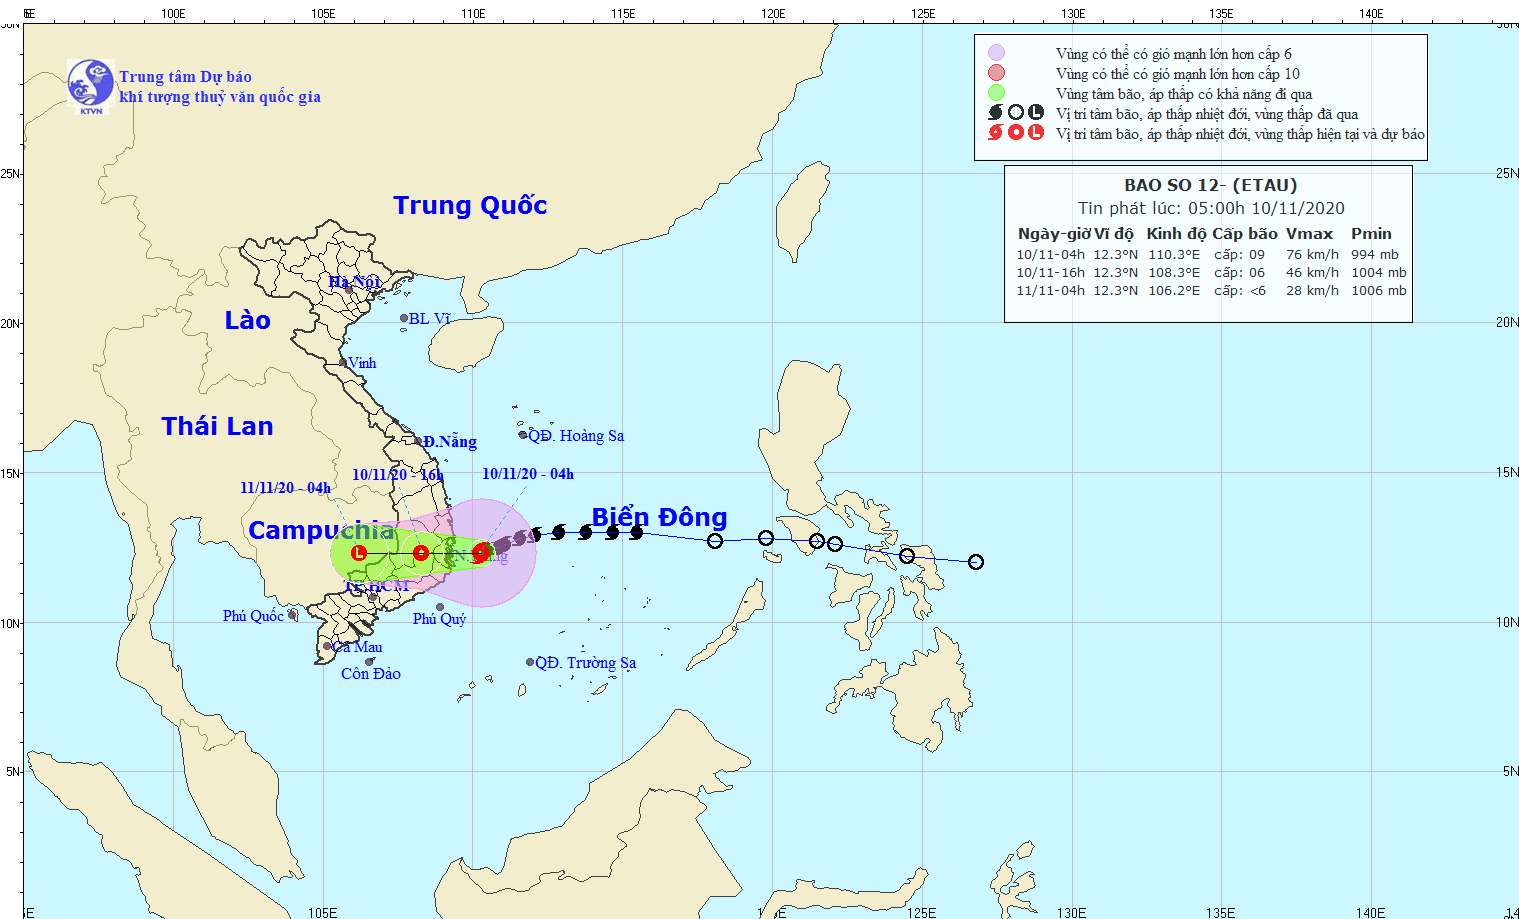 Storm Etau is close to Central provinces from Binh Dinh to Ninh Thuan on November 11